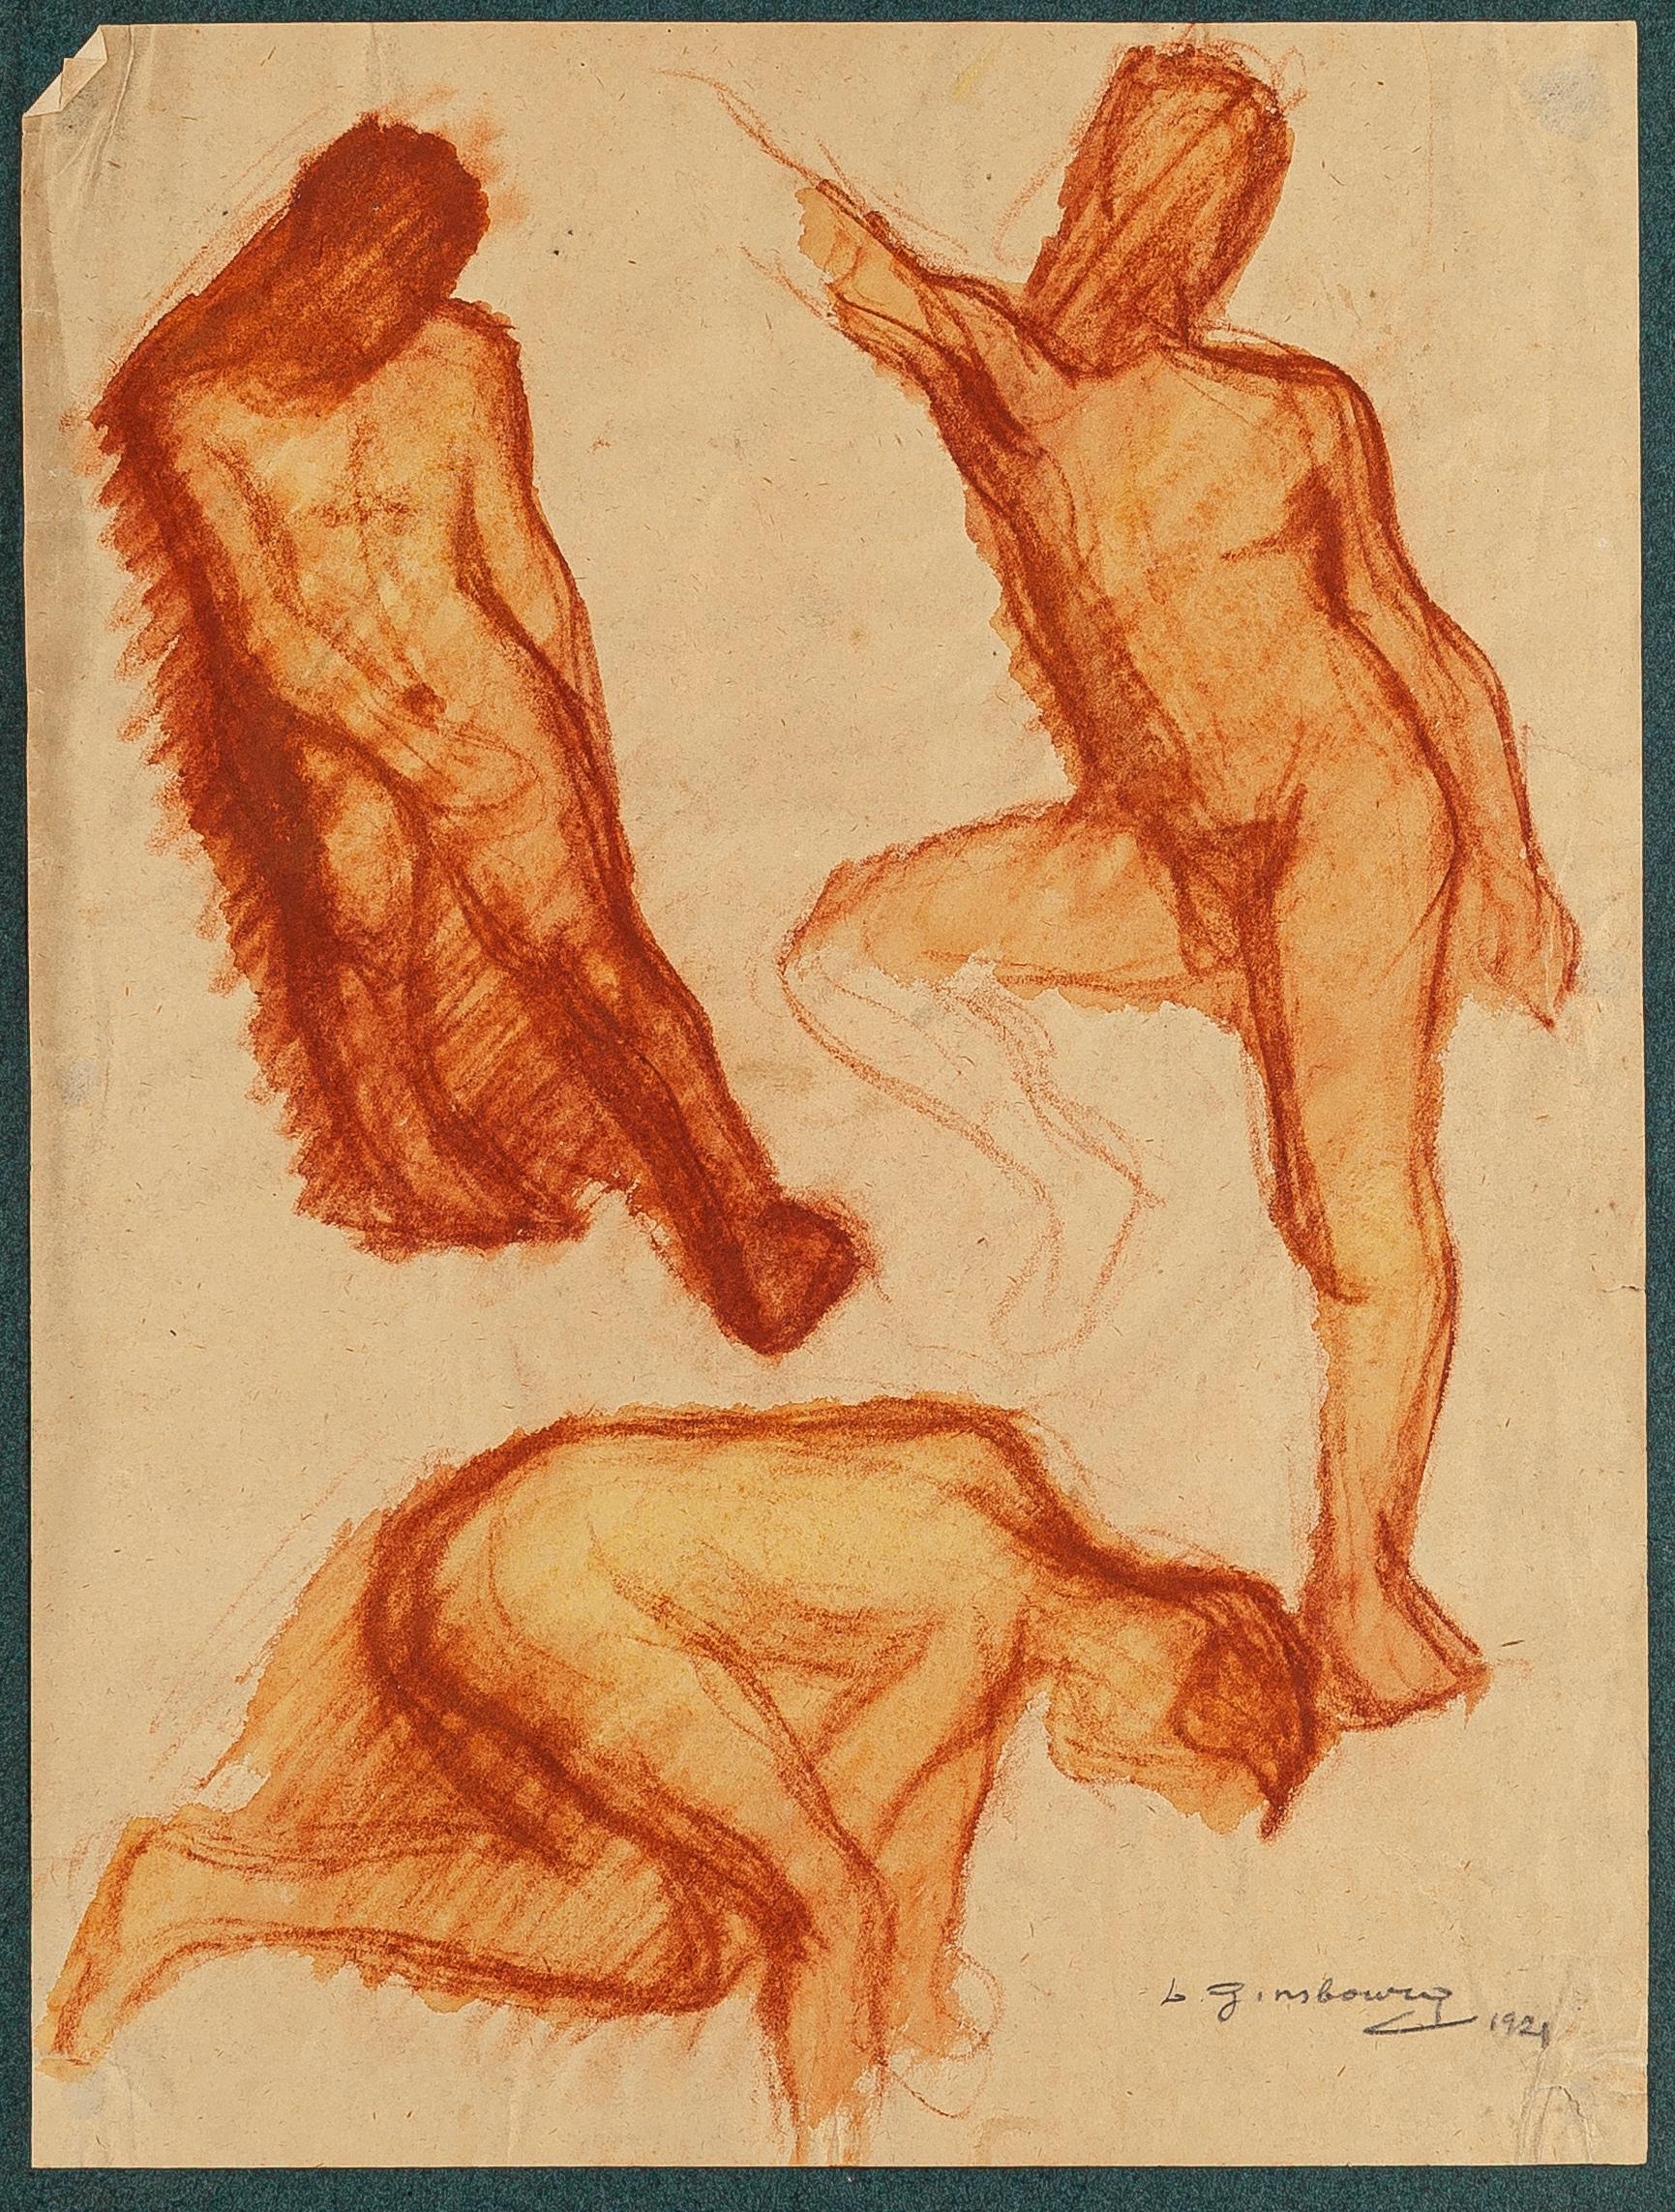 Male Nudes - Original Drawing on Paper by D. Ginsbourg - 1921